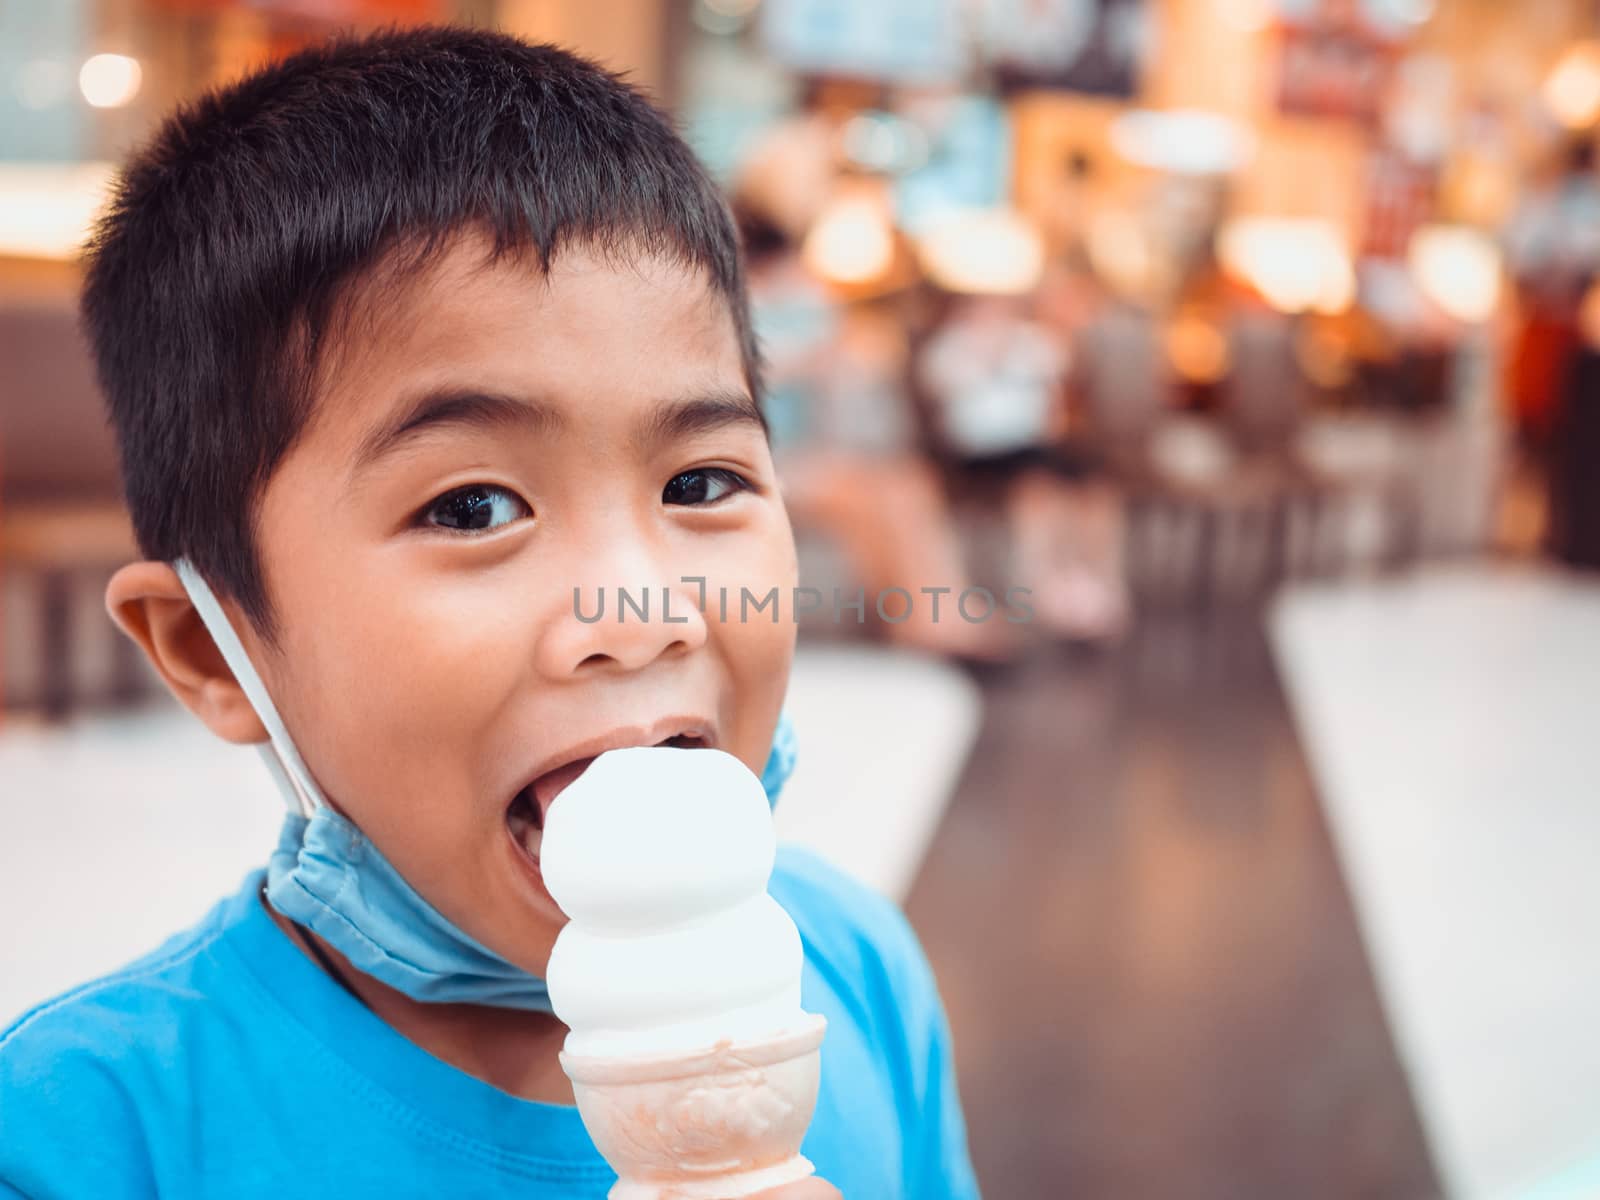 A boy eating ice cream inside a mall with a blurred background